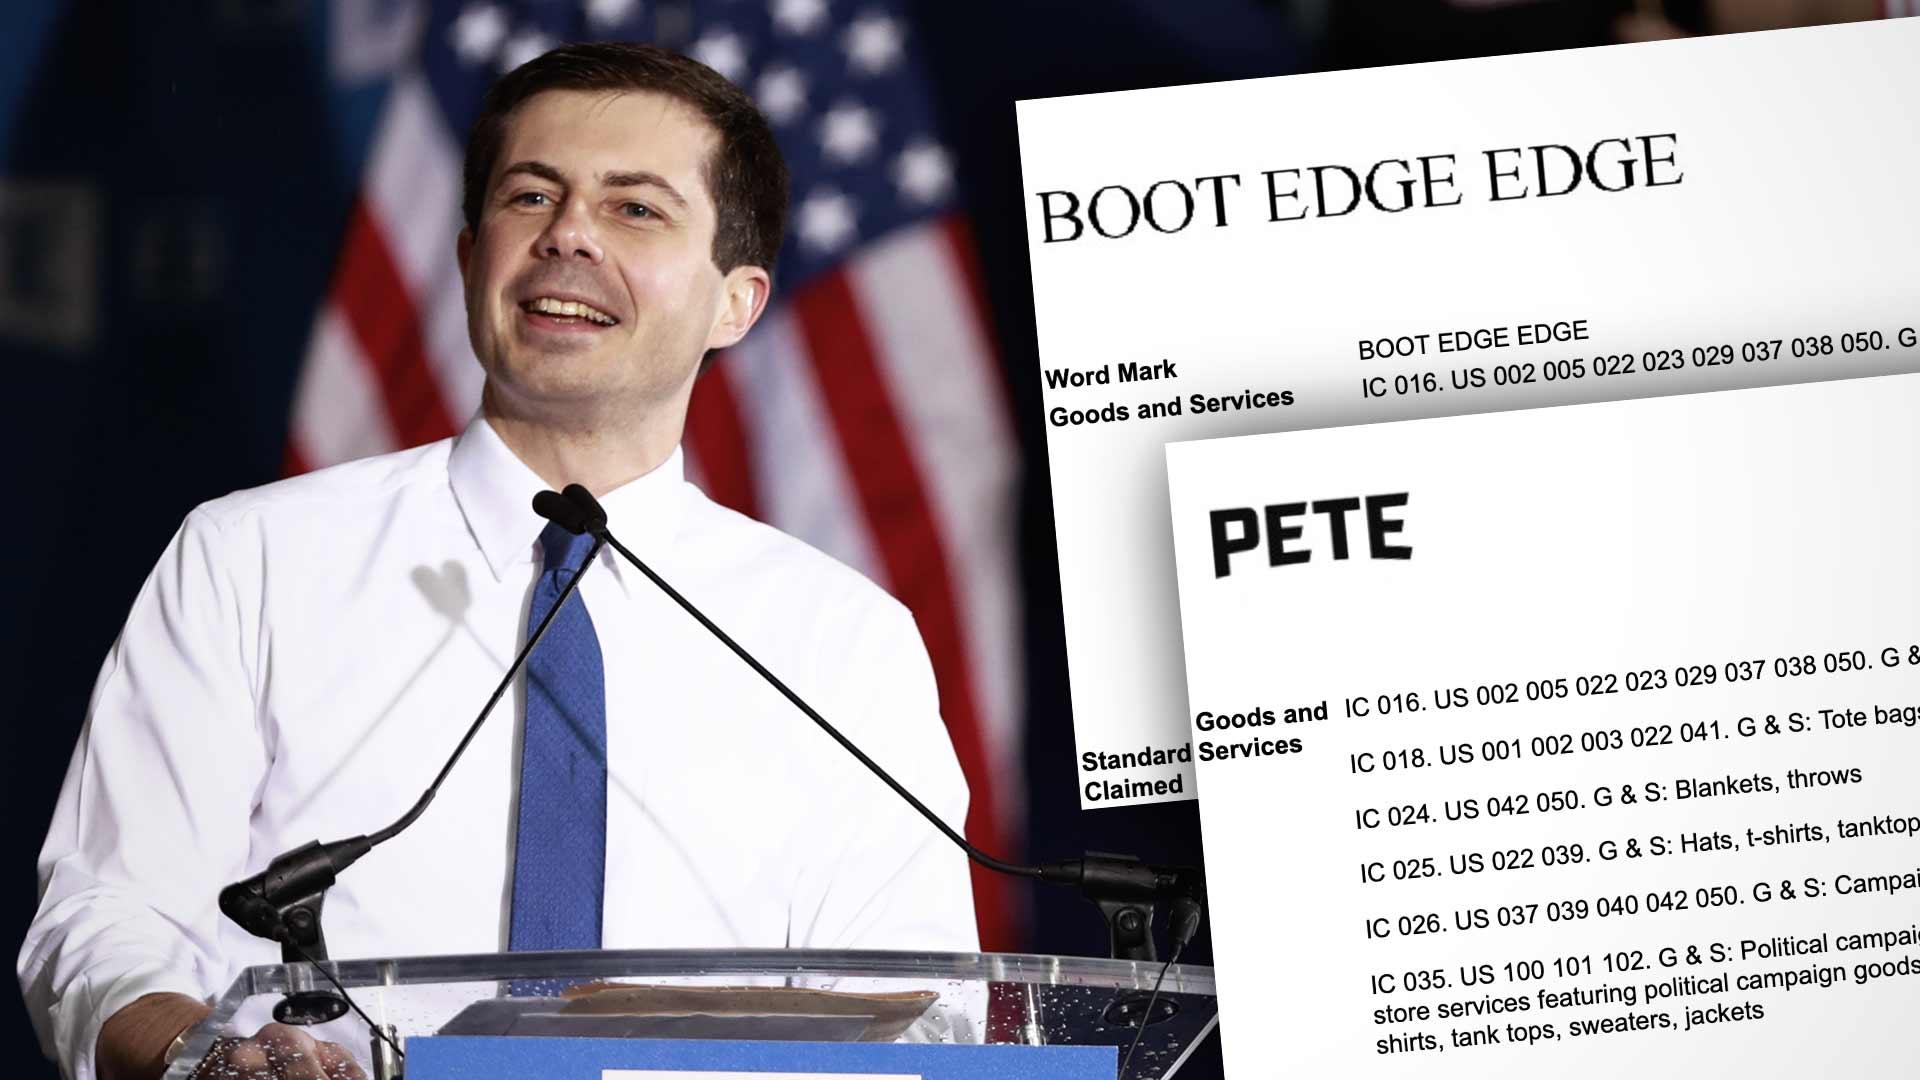 Presidential Candidate Pete Buttigieg Files Papers to Explain How Name is Pronounced